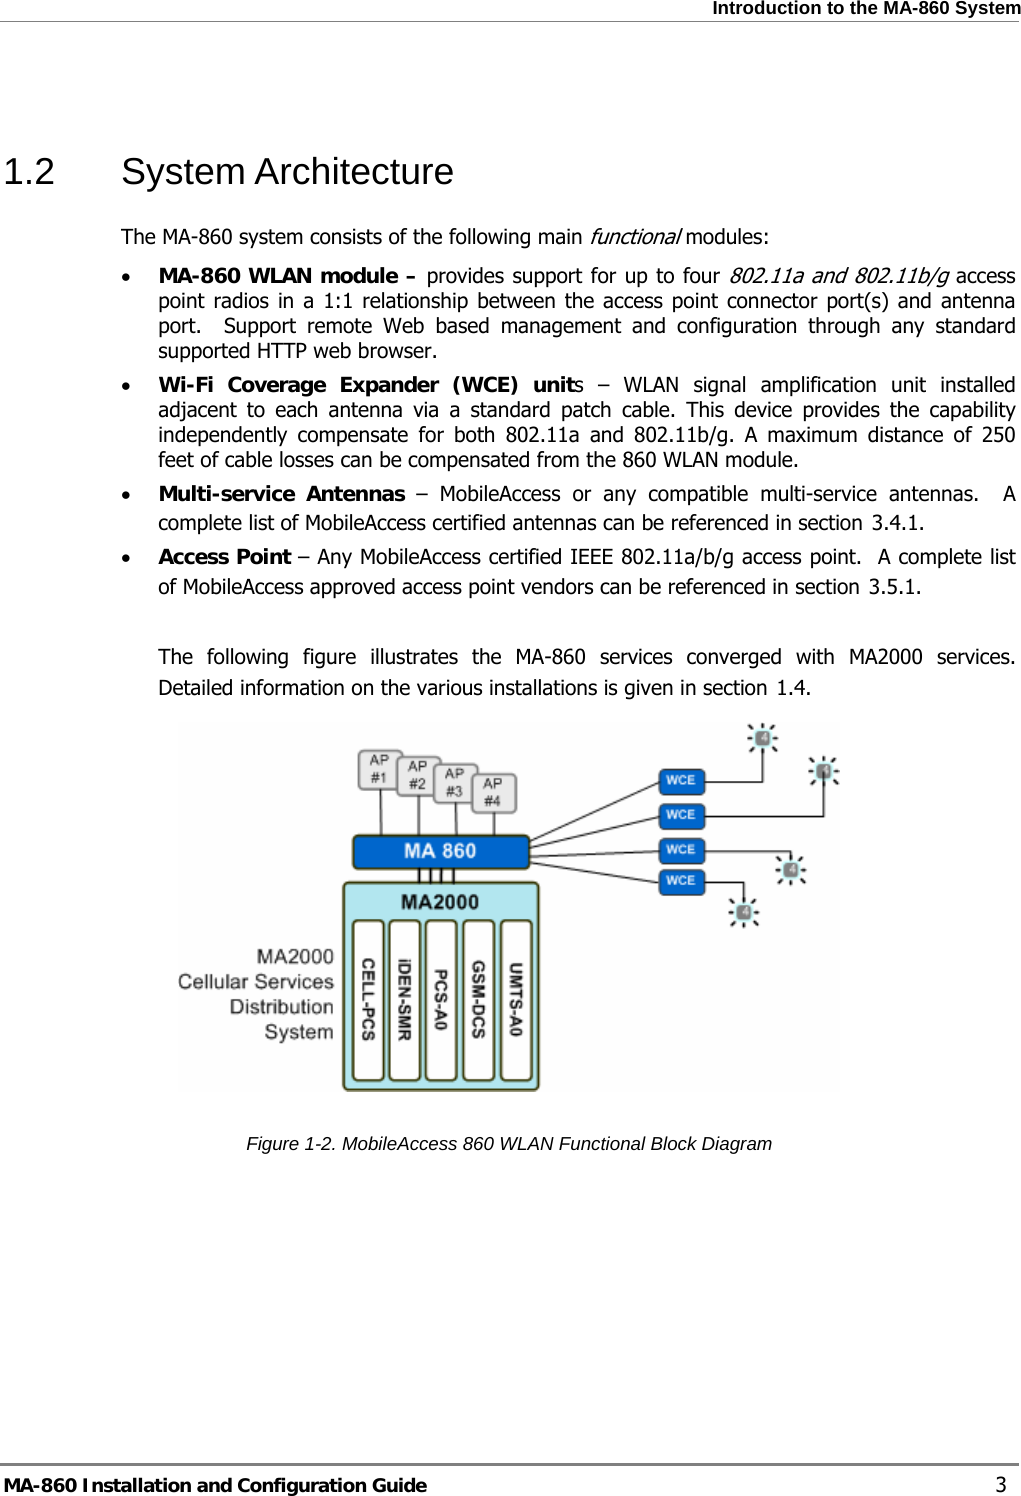  Introduction to the MA-860 System   1.2 System Architecture The MA-860 system consists of the following main functional modules: • MA-860 WLAN module – provides support for up to four 802.11a and 802.11b/g access point radios in a 1:1 relationship between the access point connector port(s) and antenna port.  Support remote Web based management and configuration through any standard supported HTTP web browser.  • Wi-Fi Coverage Expander (WCE) units – WLAN signal amplification unit installed adjacent to each antenna via a standard patch cable. This device provides the capability independently compensate for both 802.11a and 802.11b/g. A maximum distance of 250 feet of cable losses can be compensated from the 860 WLAN module. • Multi-service Antennas – MobileAccess or any compatible multi-service antennas.  A complete list of MobileAccess certified antennas can be referenced in section  3.4.1.  • Access Point – Any MobileAccess certified IEEE 802.11a/b/g access point.  A complete list of MobileAccess approved access point vendors can be referenced in section  3.5.1.  The following figure illustrates the MA-860 services converged with MA2000 services. Detailed information on the various installations is given in section  1.4.   Figure  1-2. MobileAccess 860 WLAN Functional Block Diagram MA-860 Installation and Configuration Guide    3 